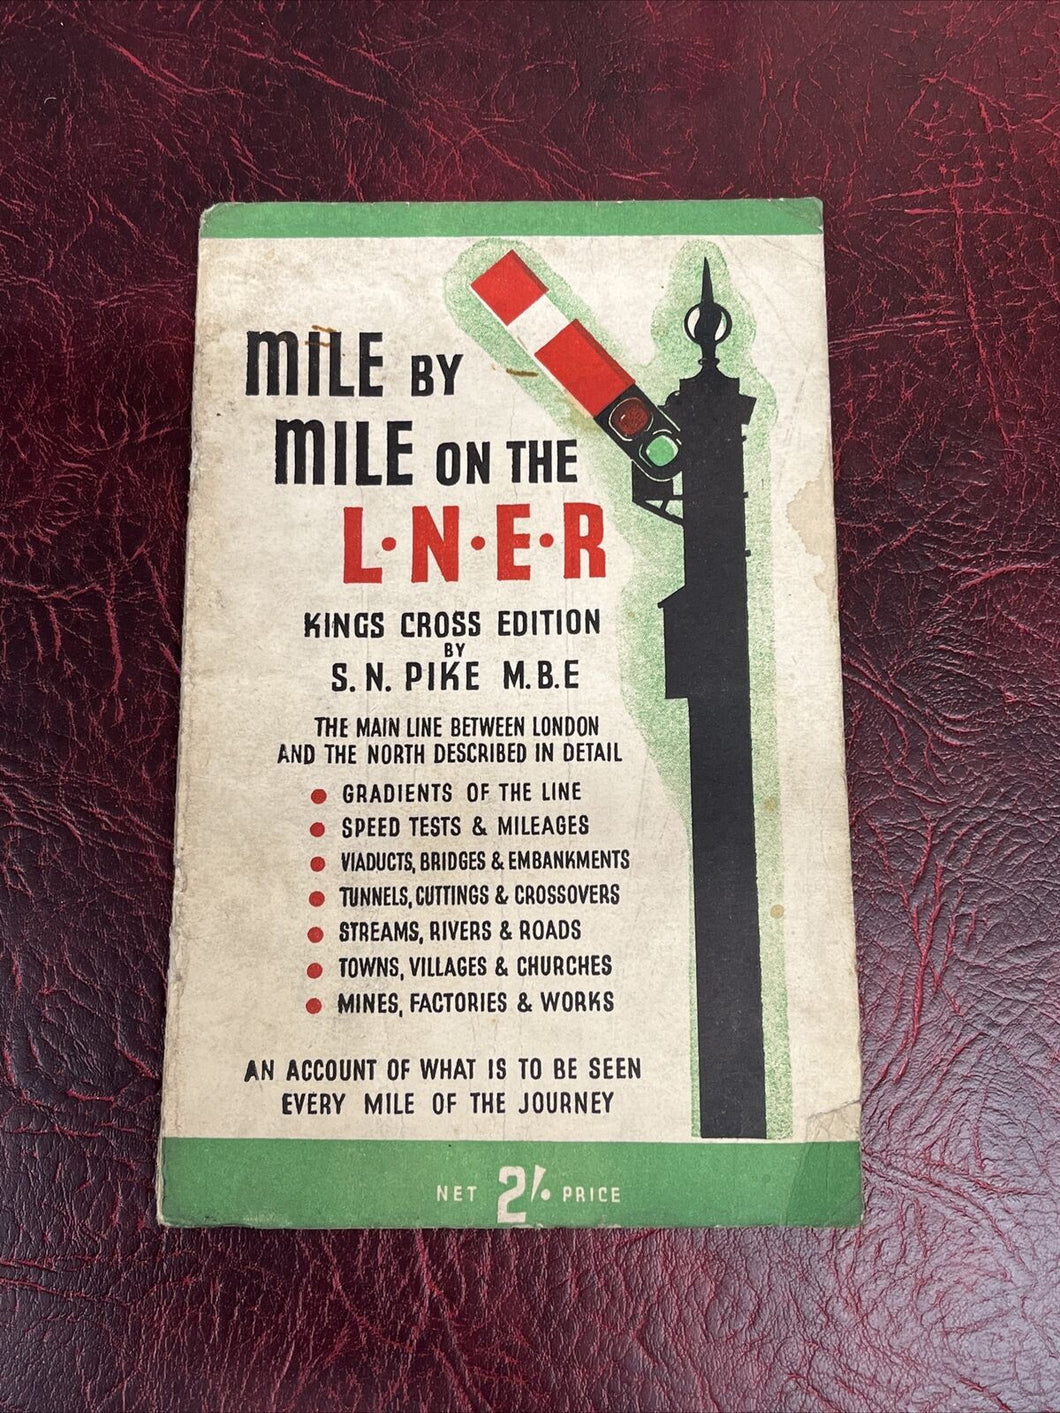 Mile By Mile On The L N E R